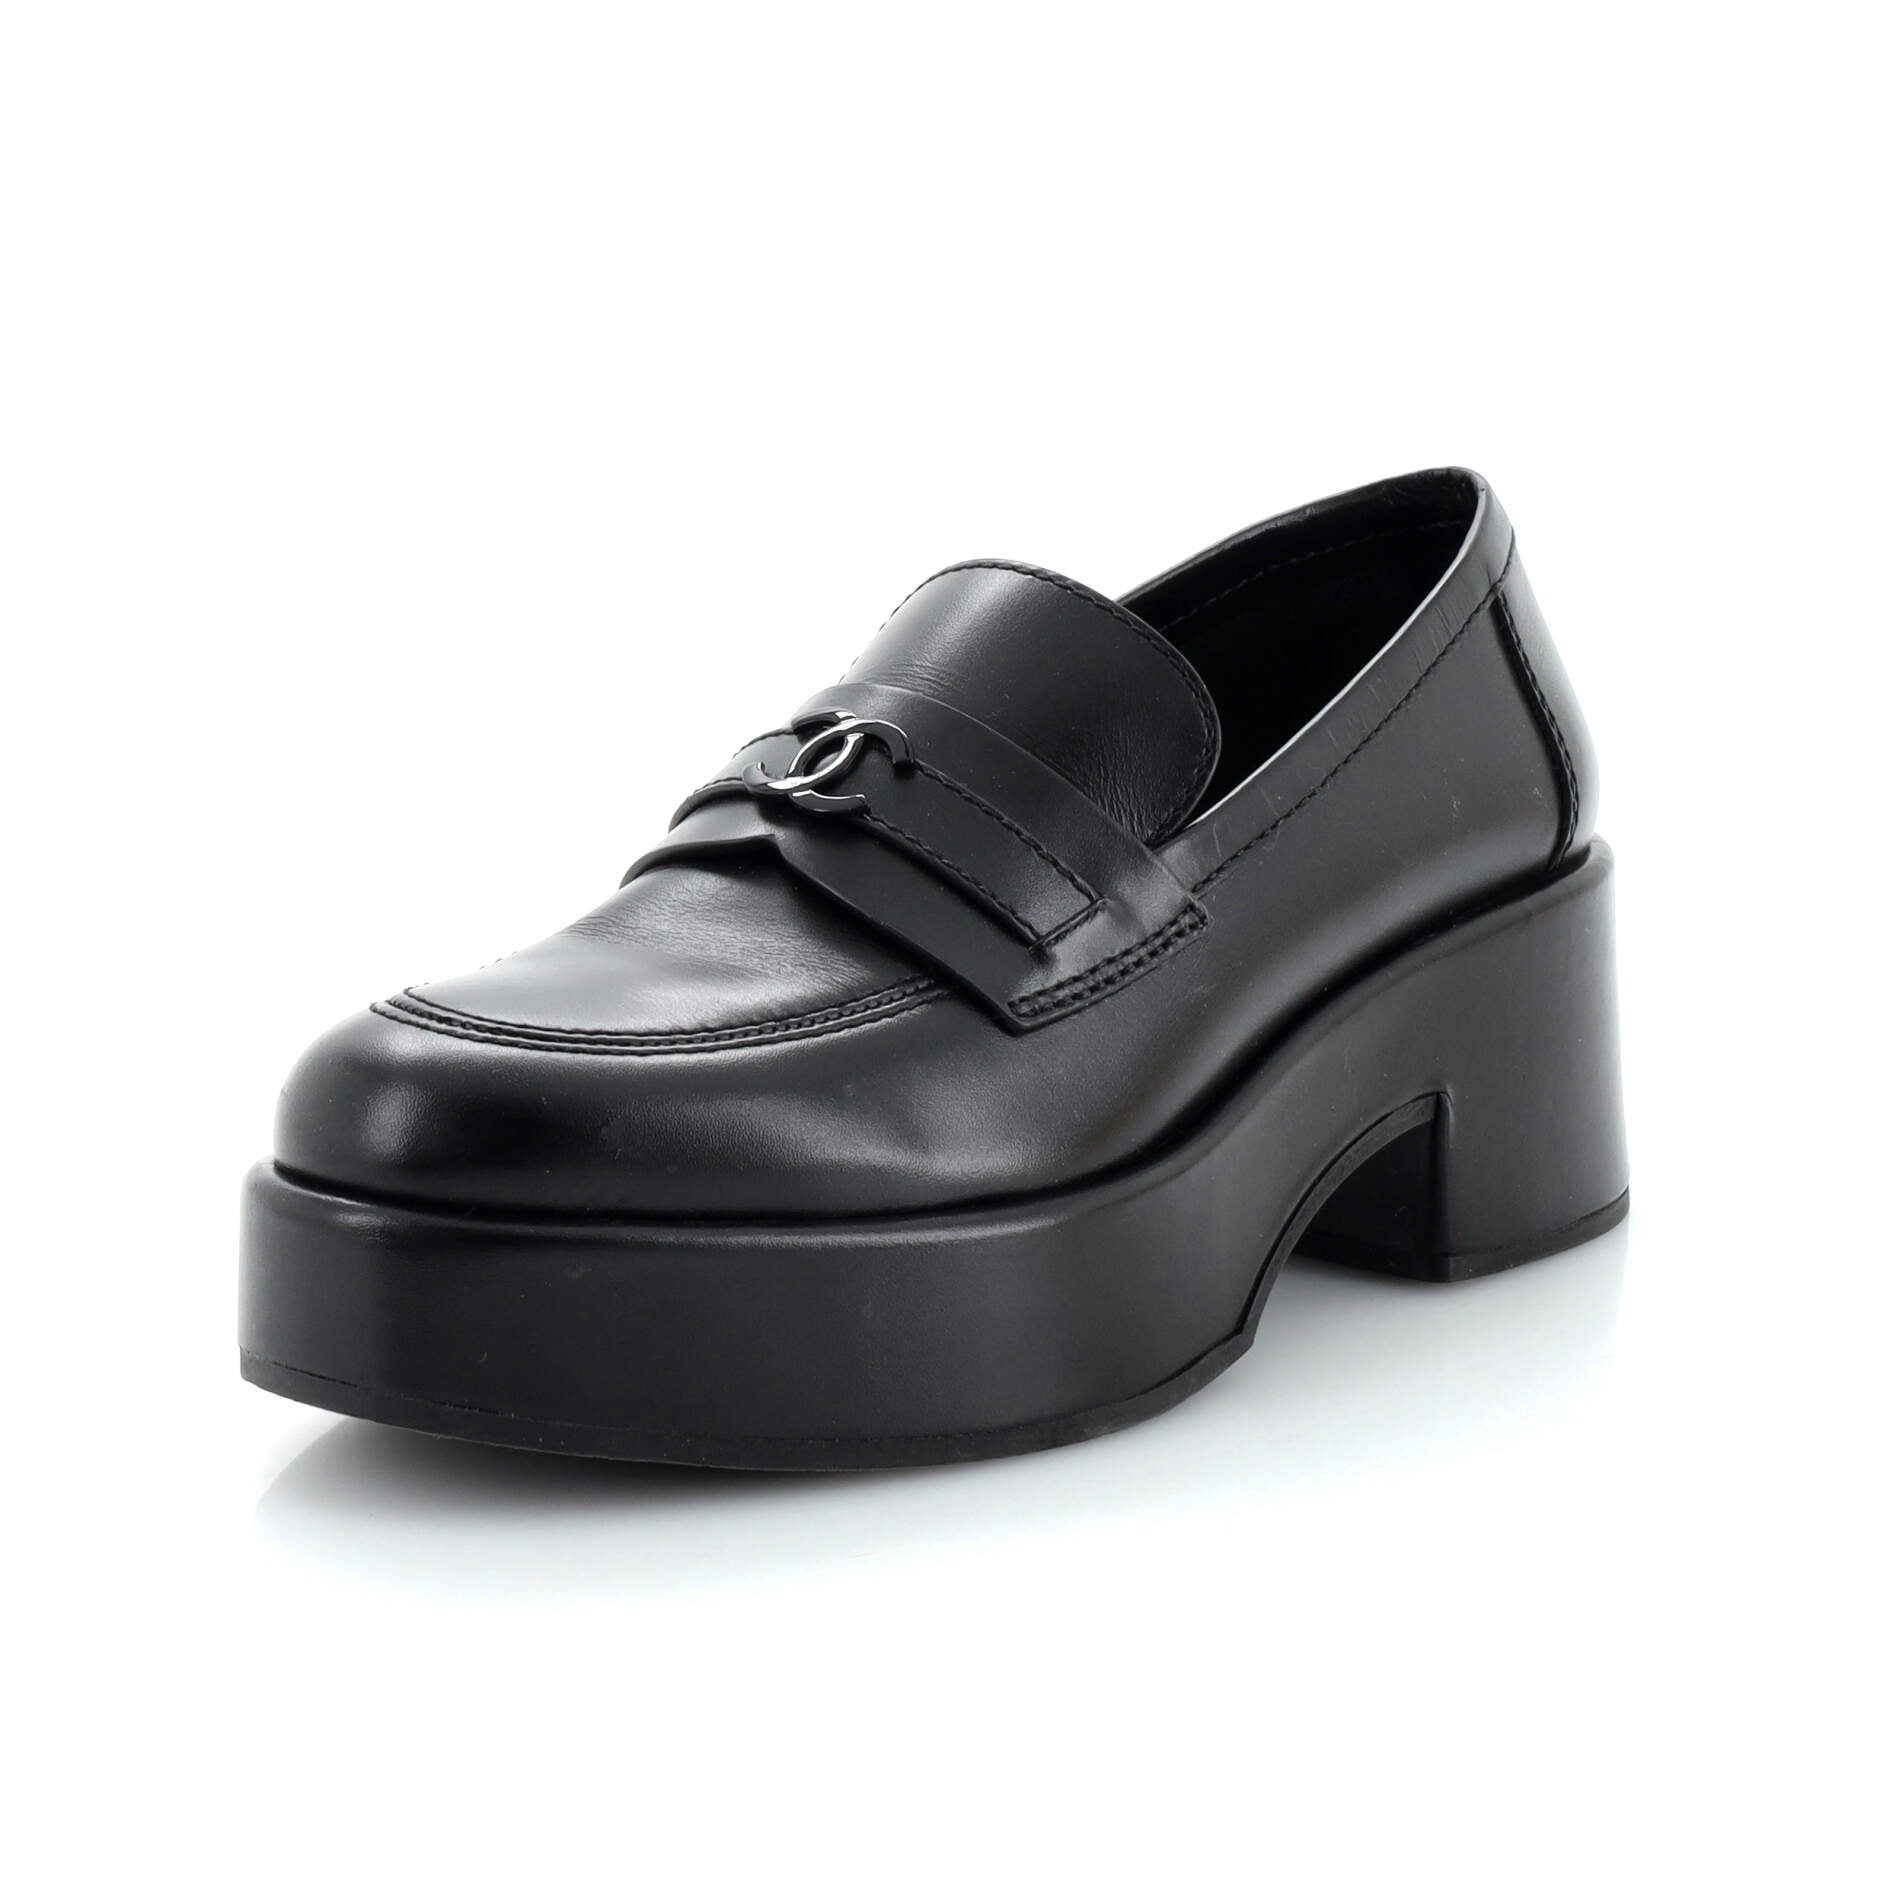 Women's CC Platform Loafers Leather